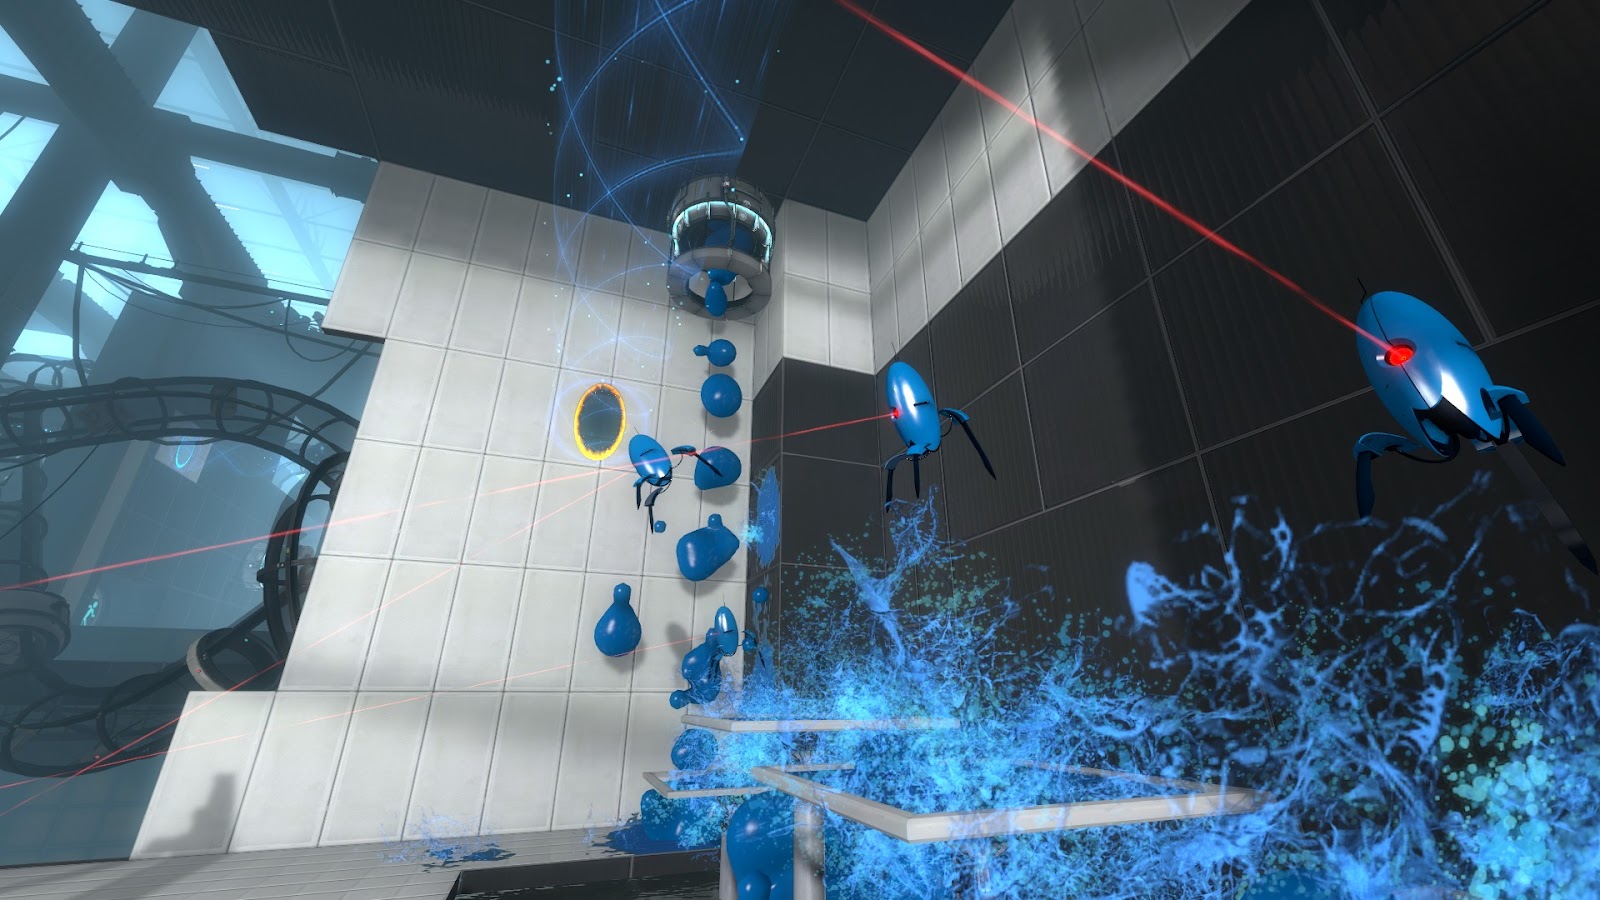 Portal 2 PC Game Free Download Ripped